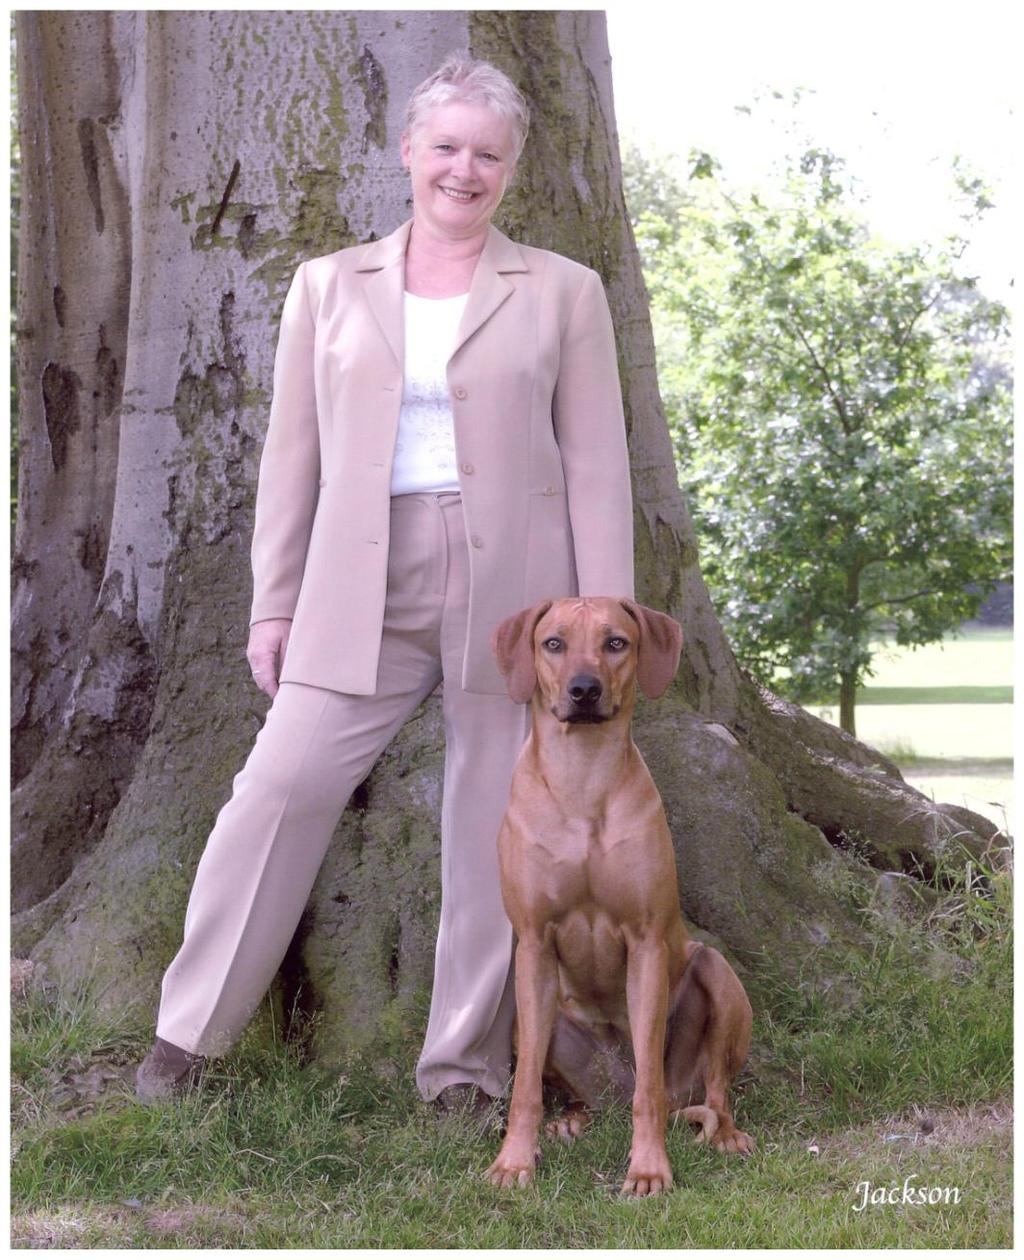 Mrs. Toni Agnew, UK I have had dogs all my life, my first being a yellow Labrador at the age of 9. He was my dog and went with me every-where.